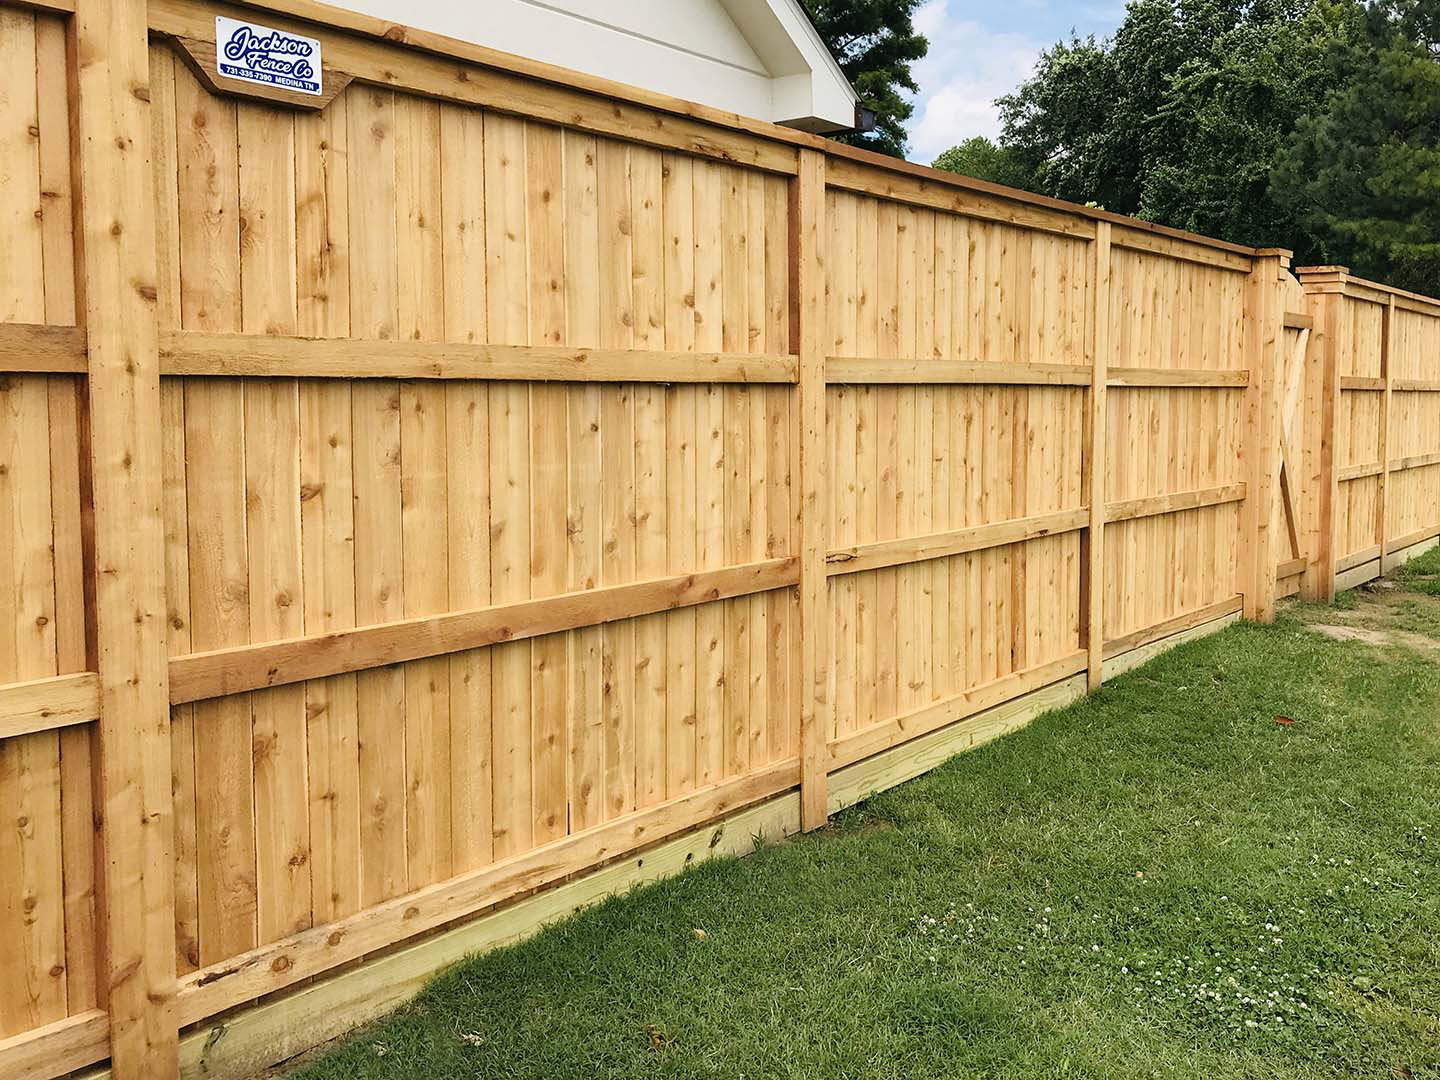  Lexington Tennessee wood privacy fencing